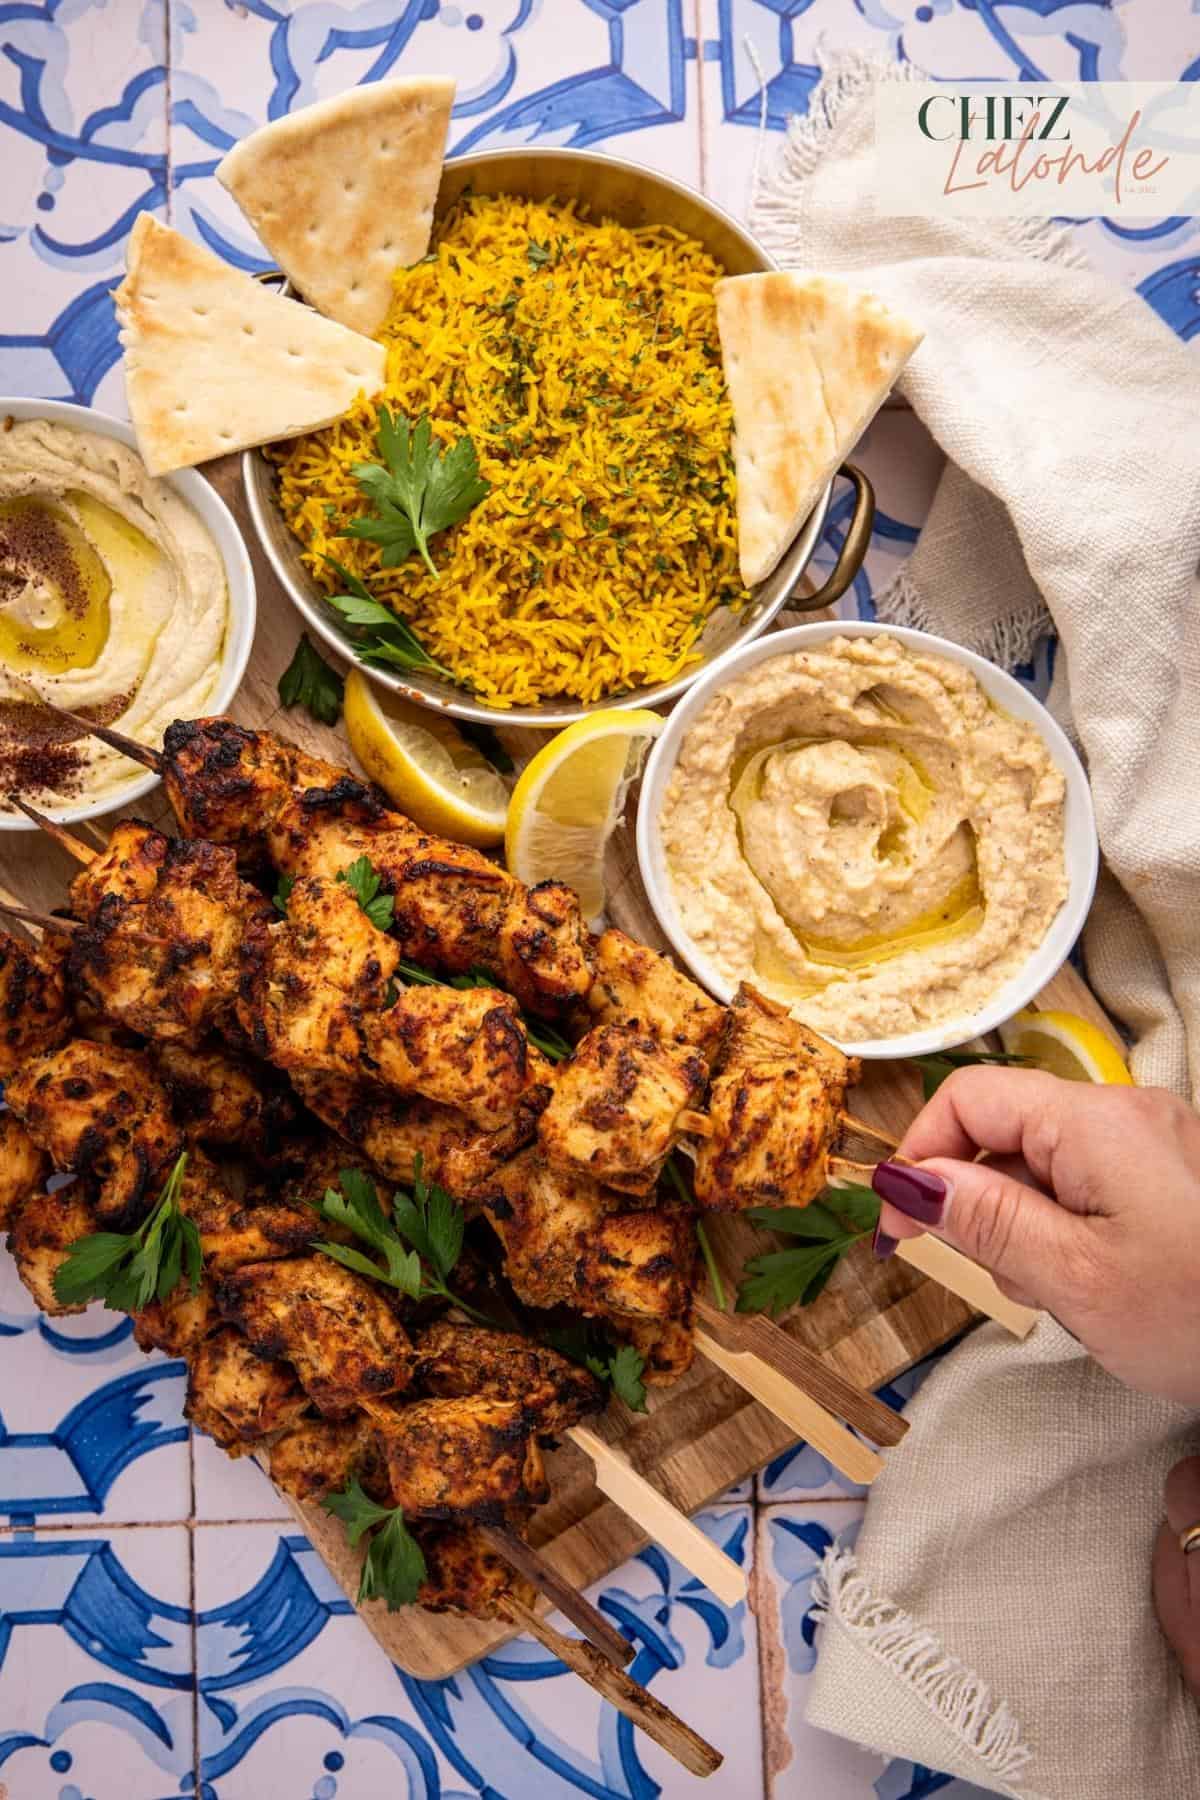 a hand is picking up a Shish tawook skewer. 